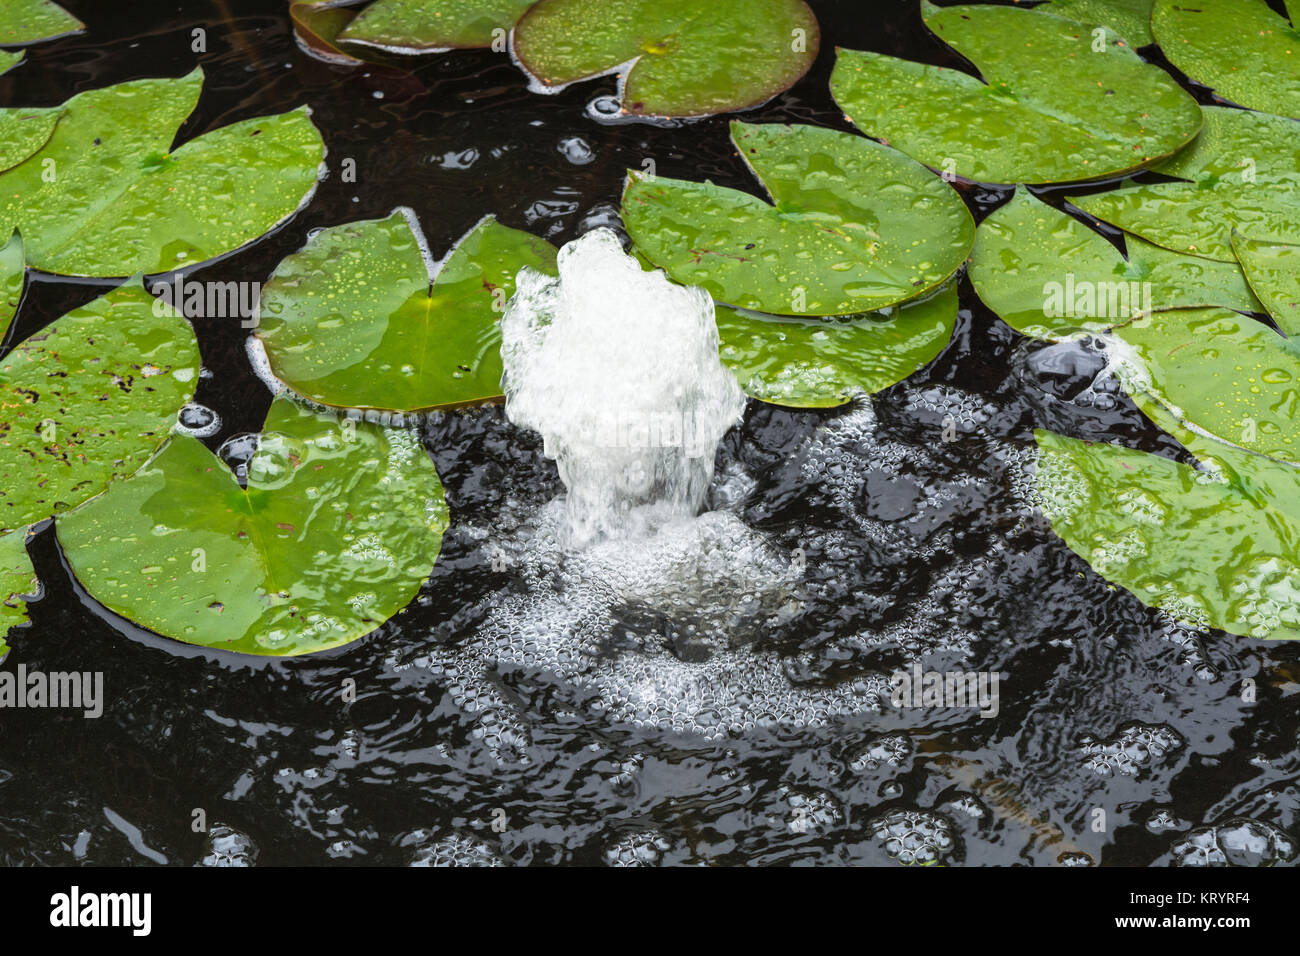 natural pond,garden pond with lily pads and water fountain Stock Photo